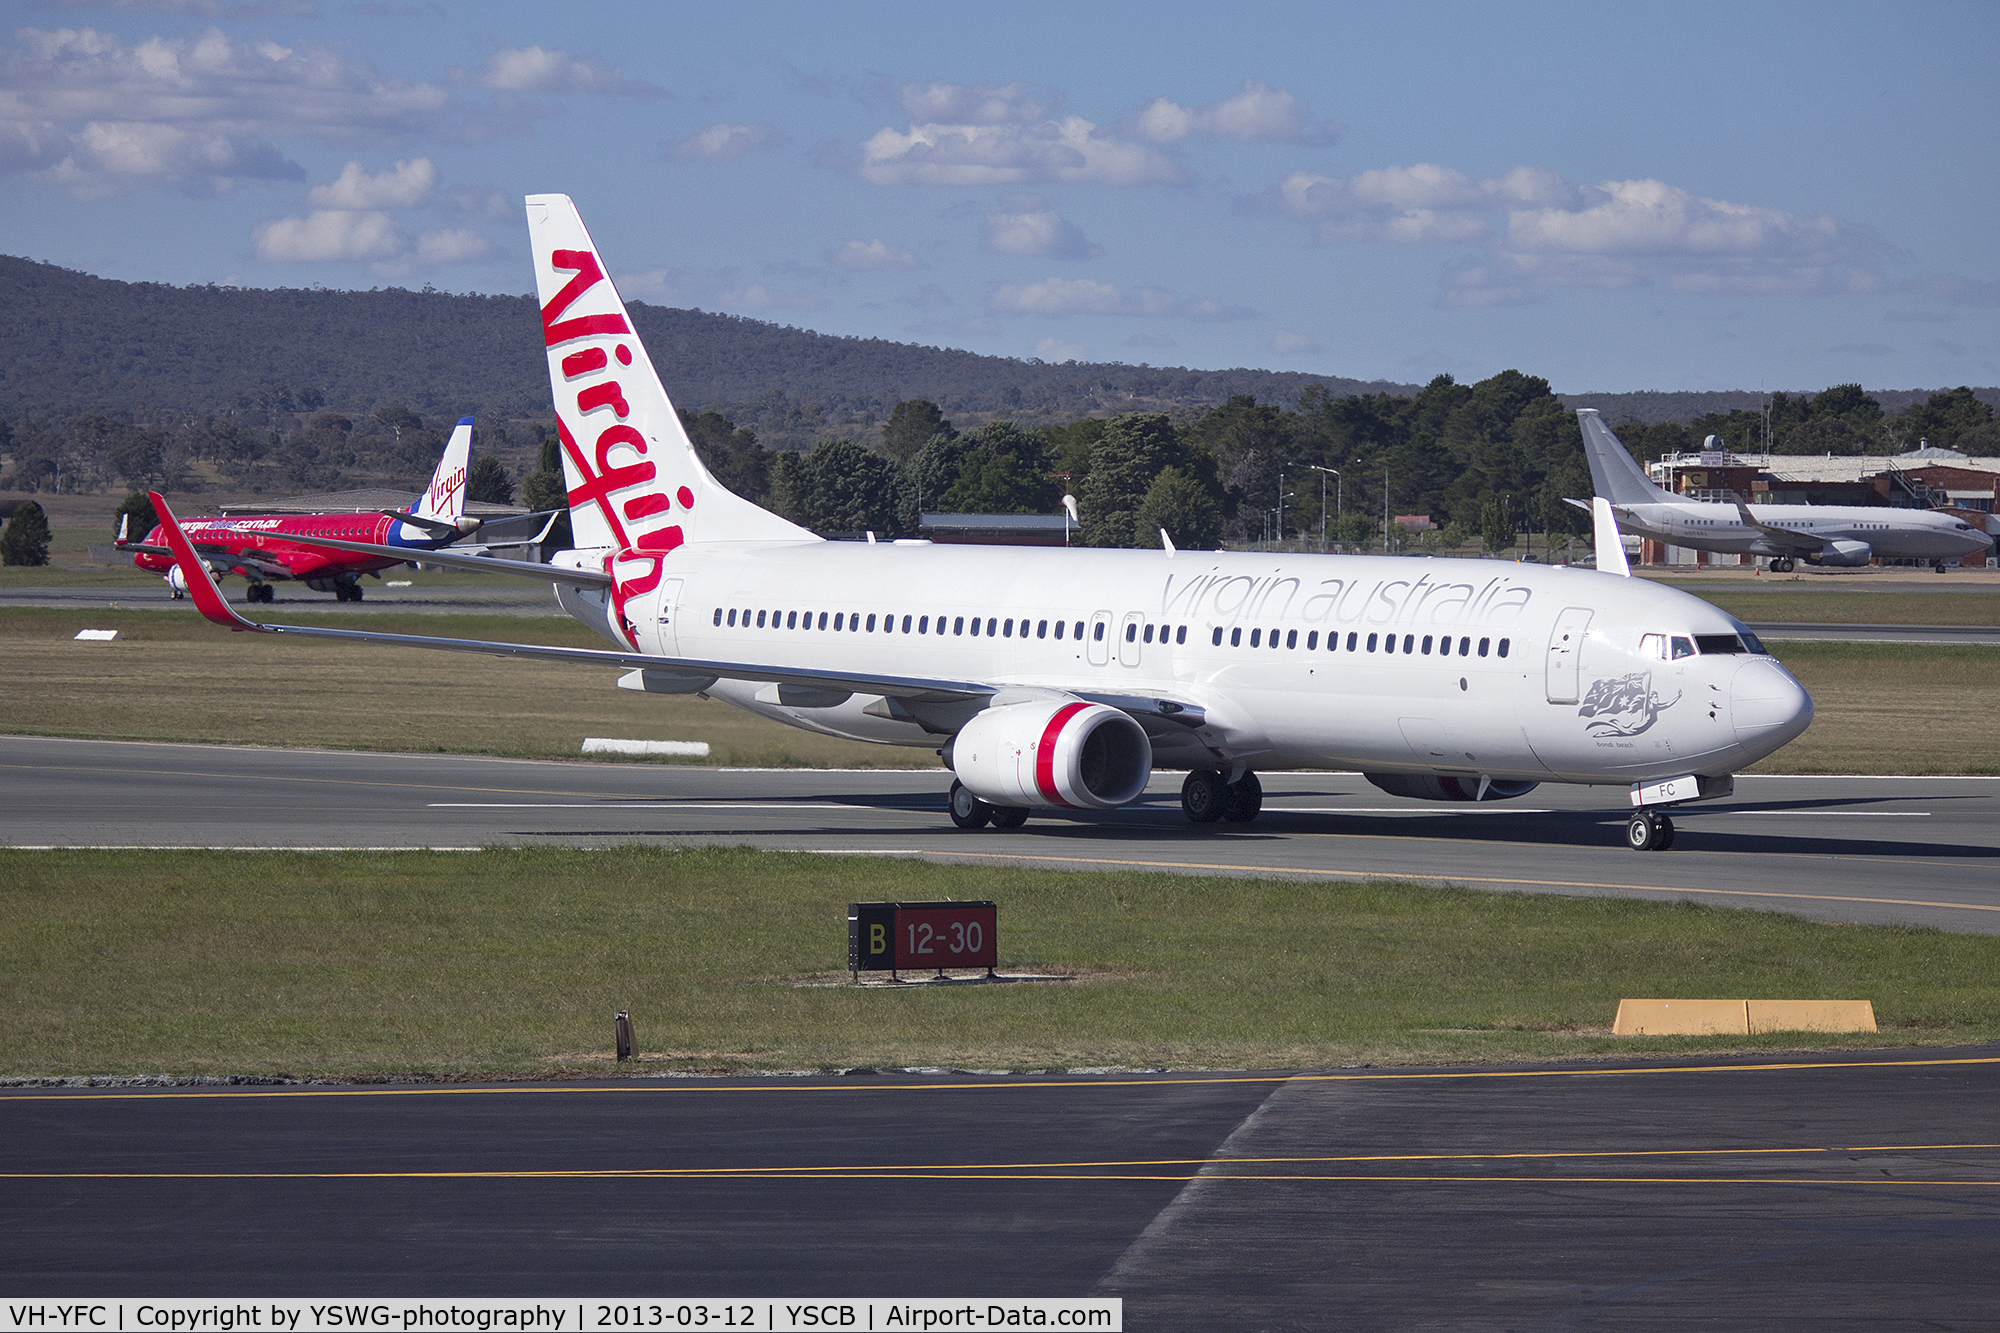 VH-YFC, 2011 Boeing 737-81D C/N 39413, Virgin Australia (VH-YFC) Boeing 737-81D (WL) taxiing to the terminal at Canberra Airport.